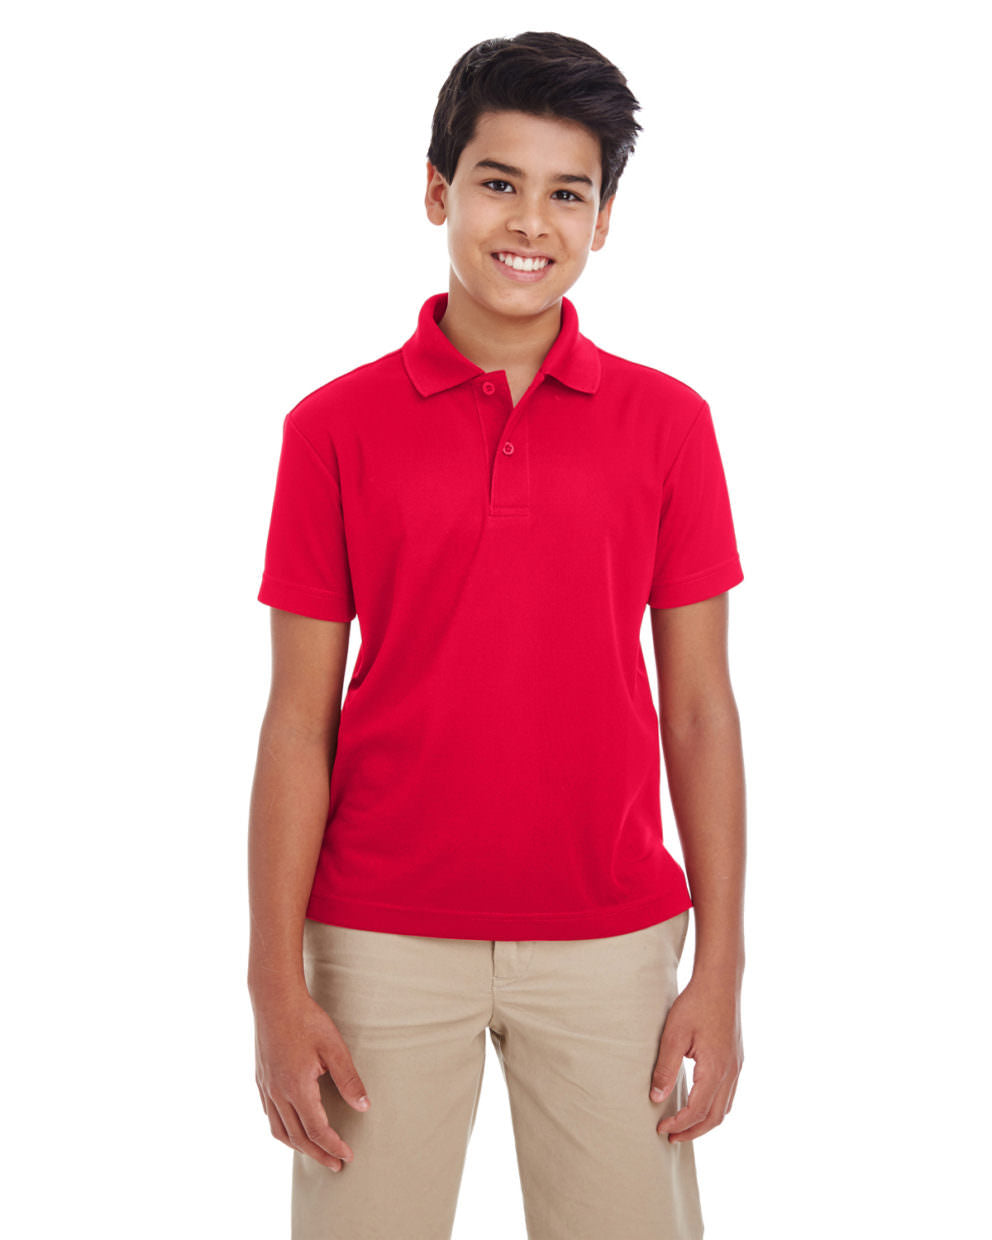 Youth Softest Performance Polo